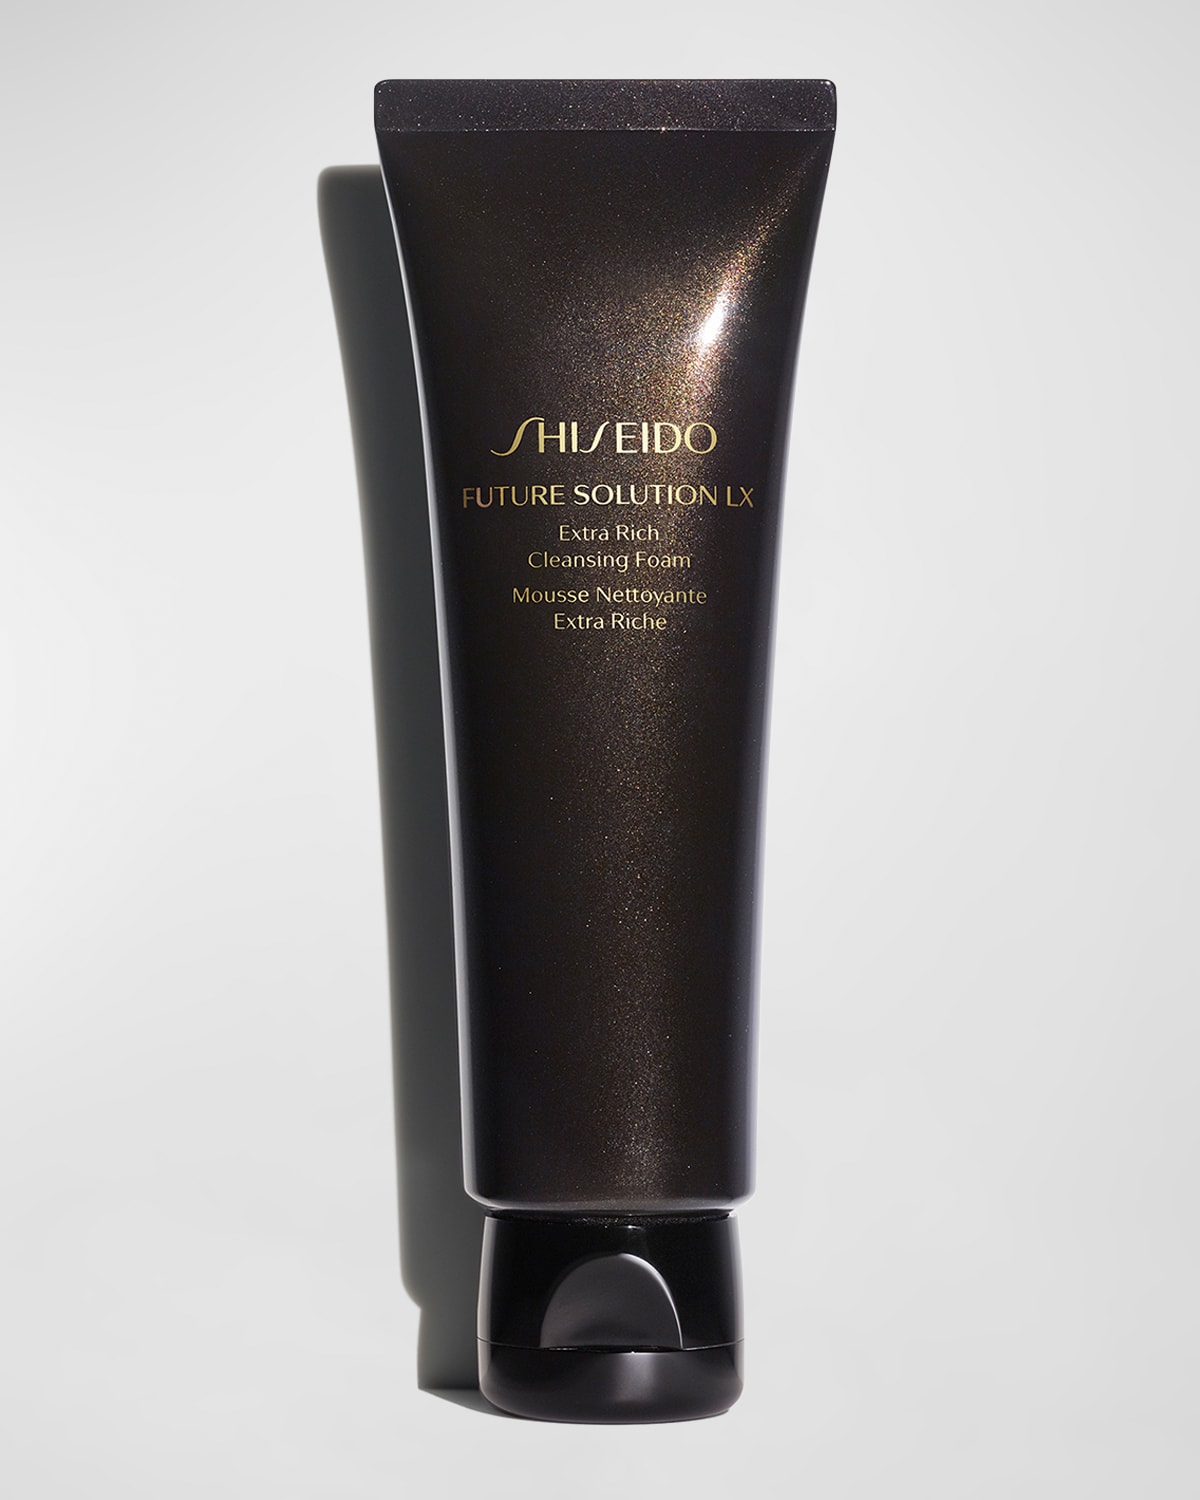 Future Solution LX Extra Rich Cleansing Foam, 4.7 oz.